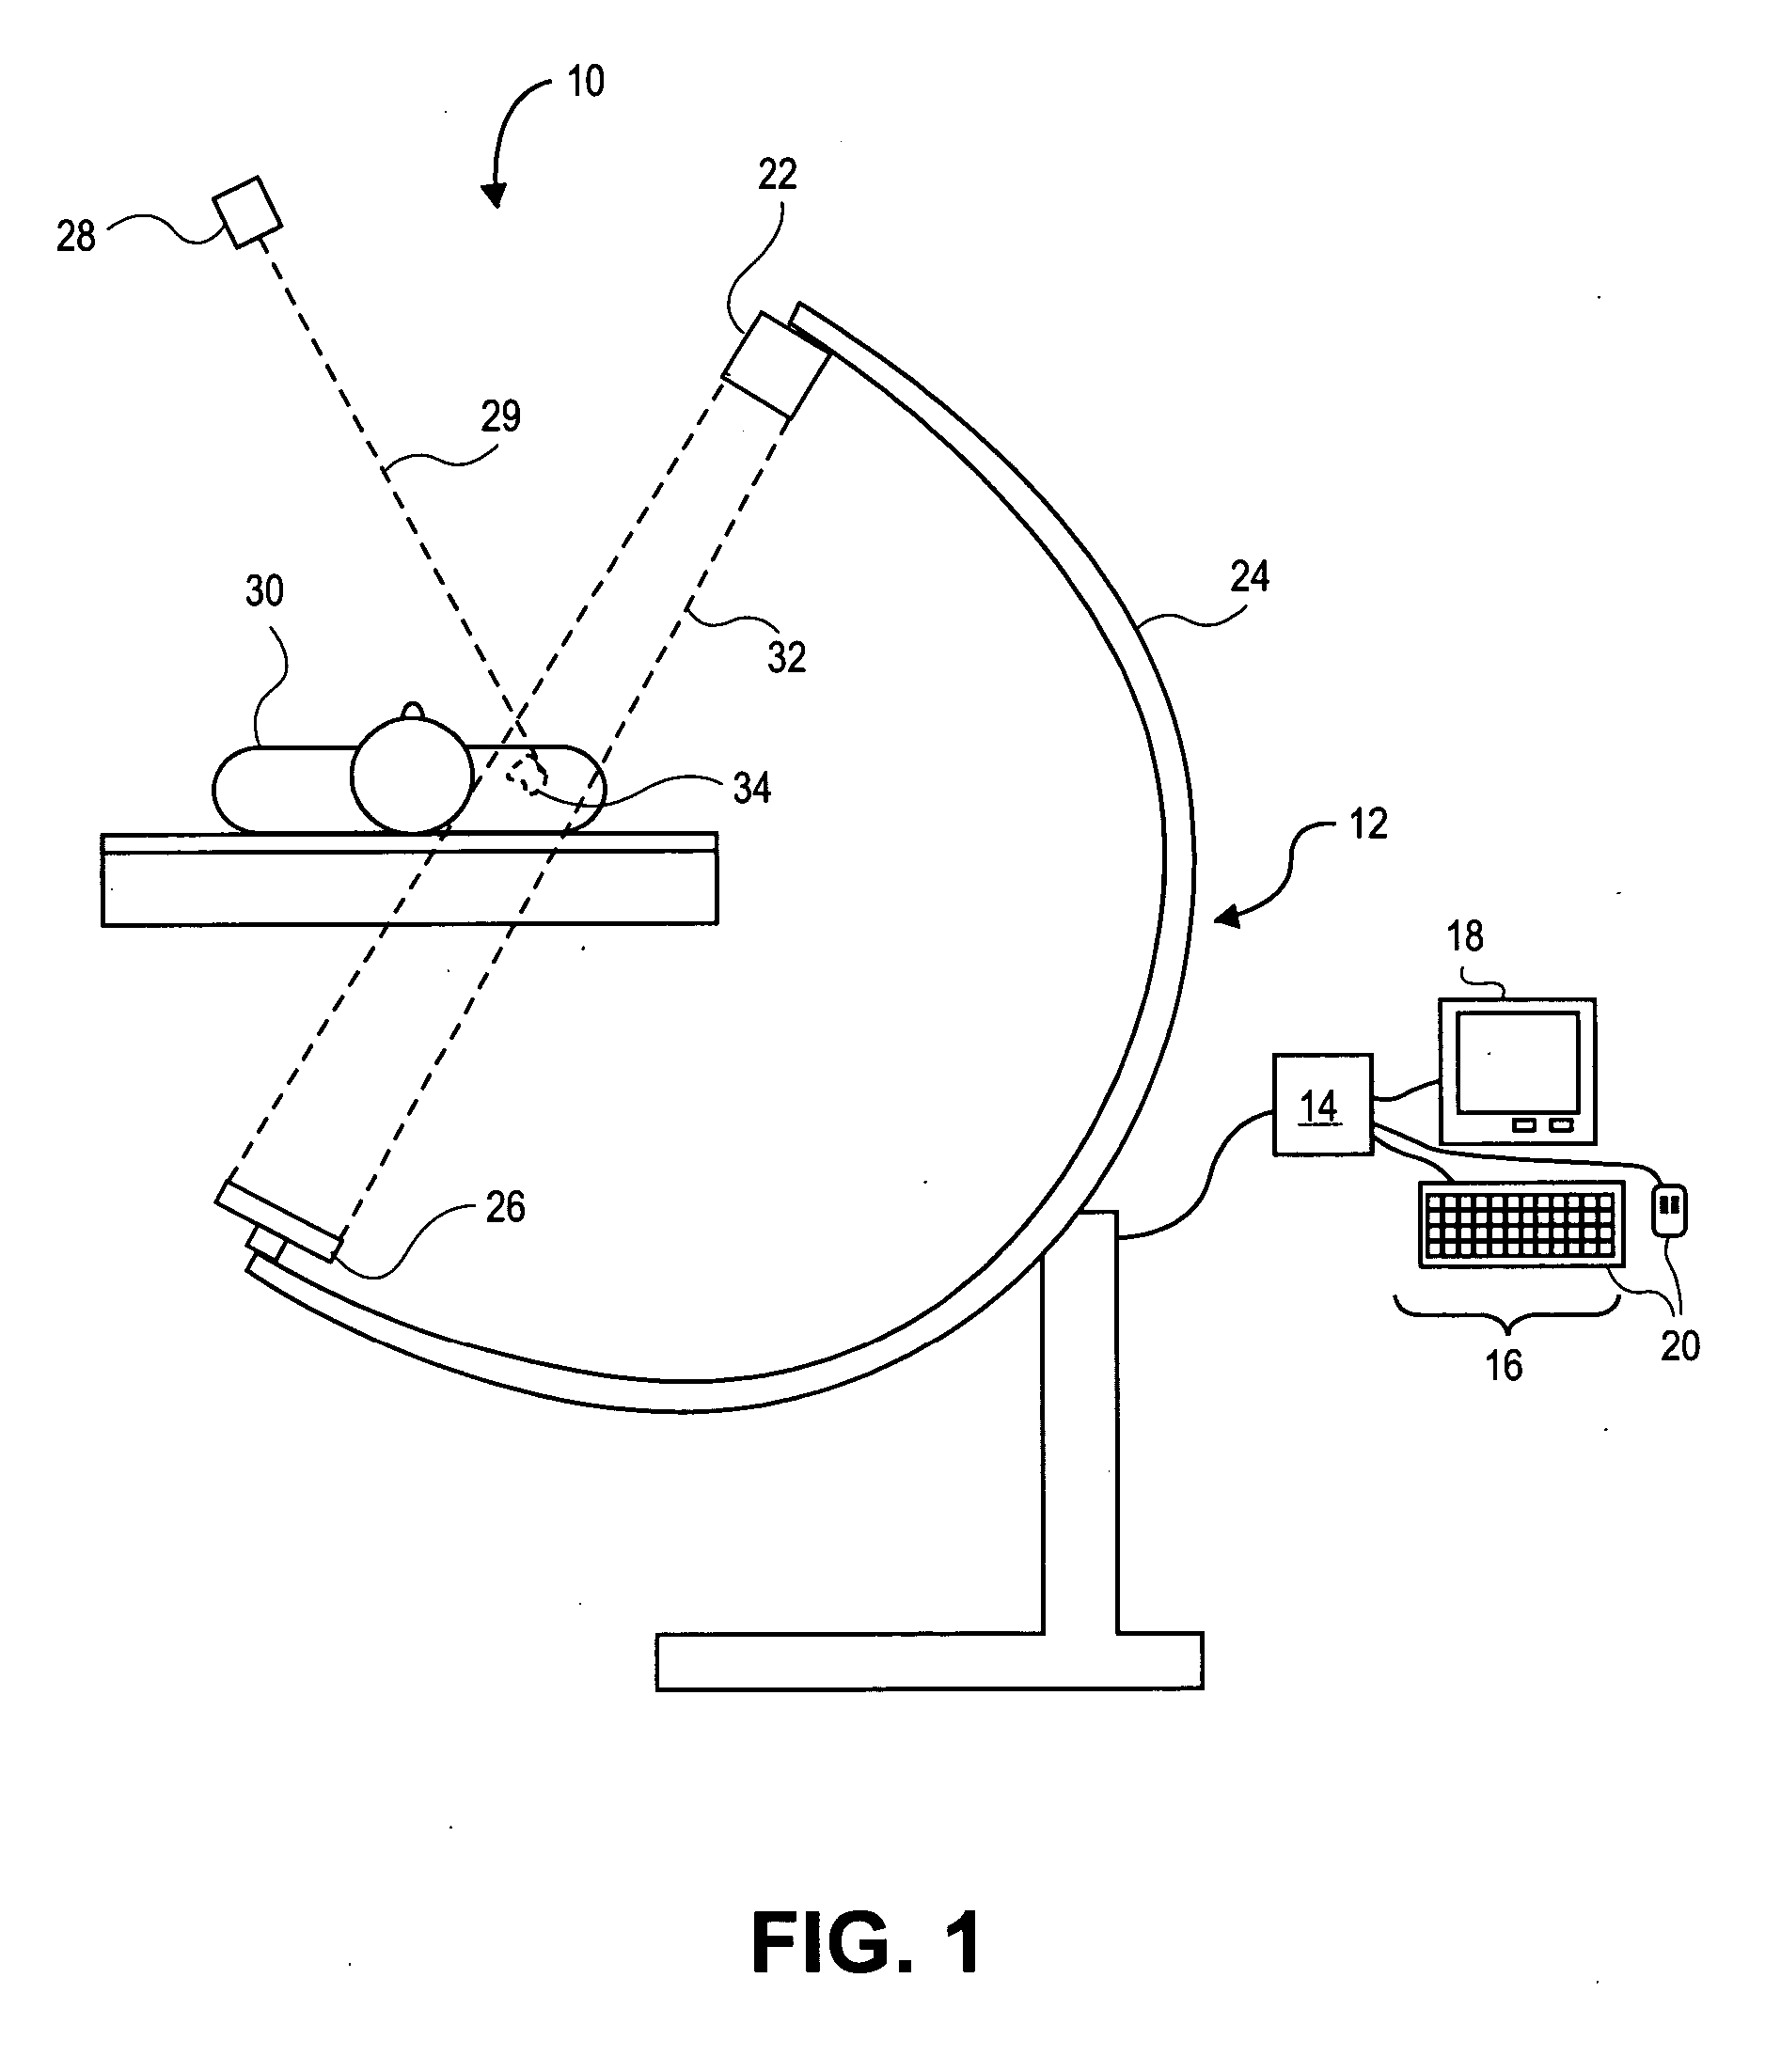 Systems and methods for gating medical procedures